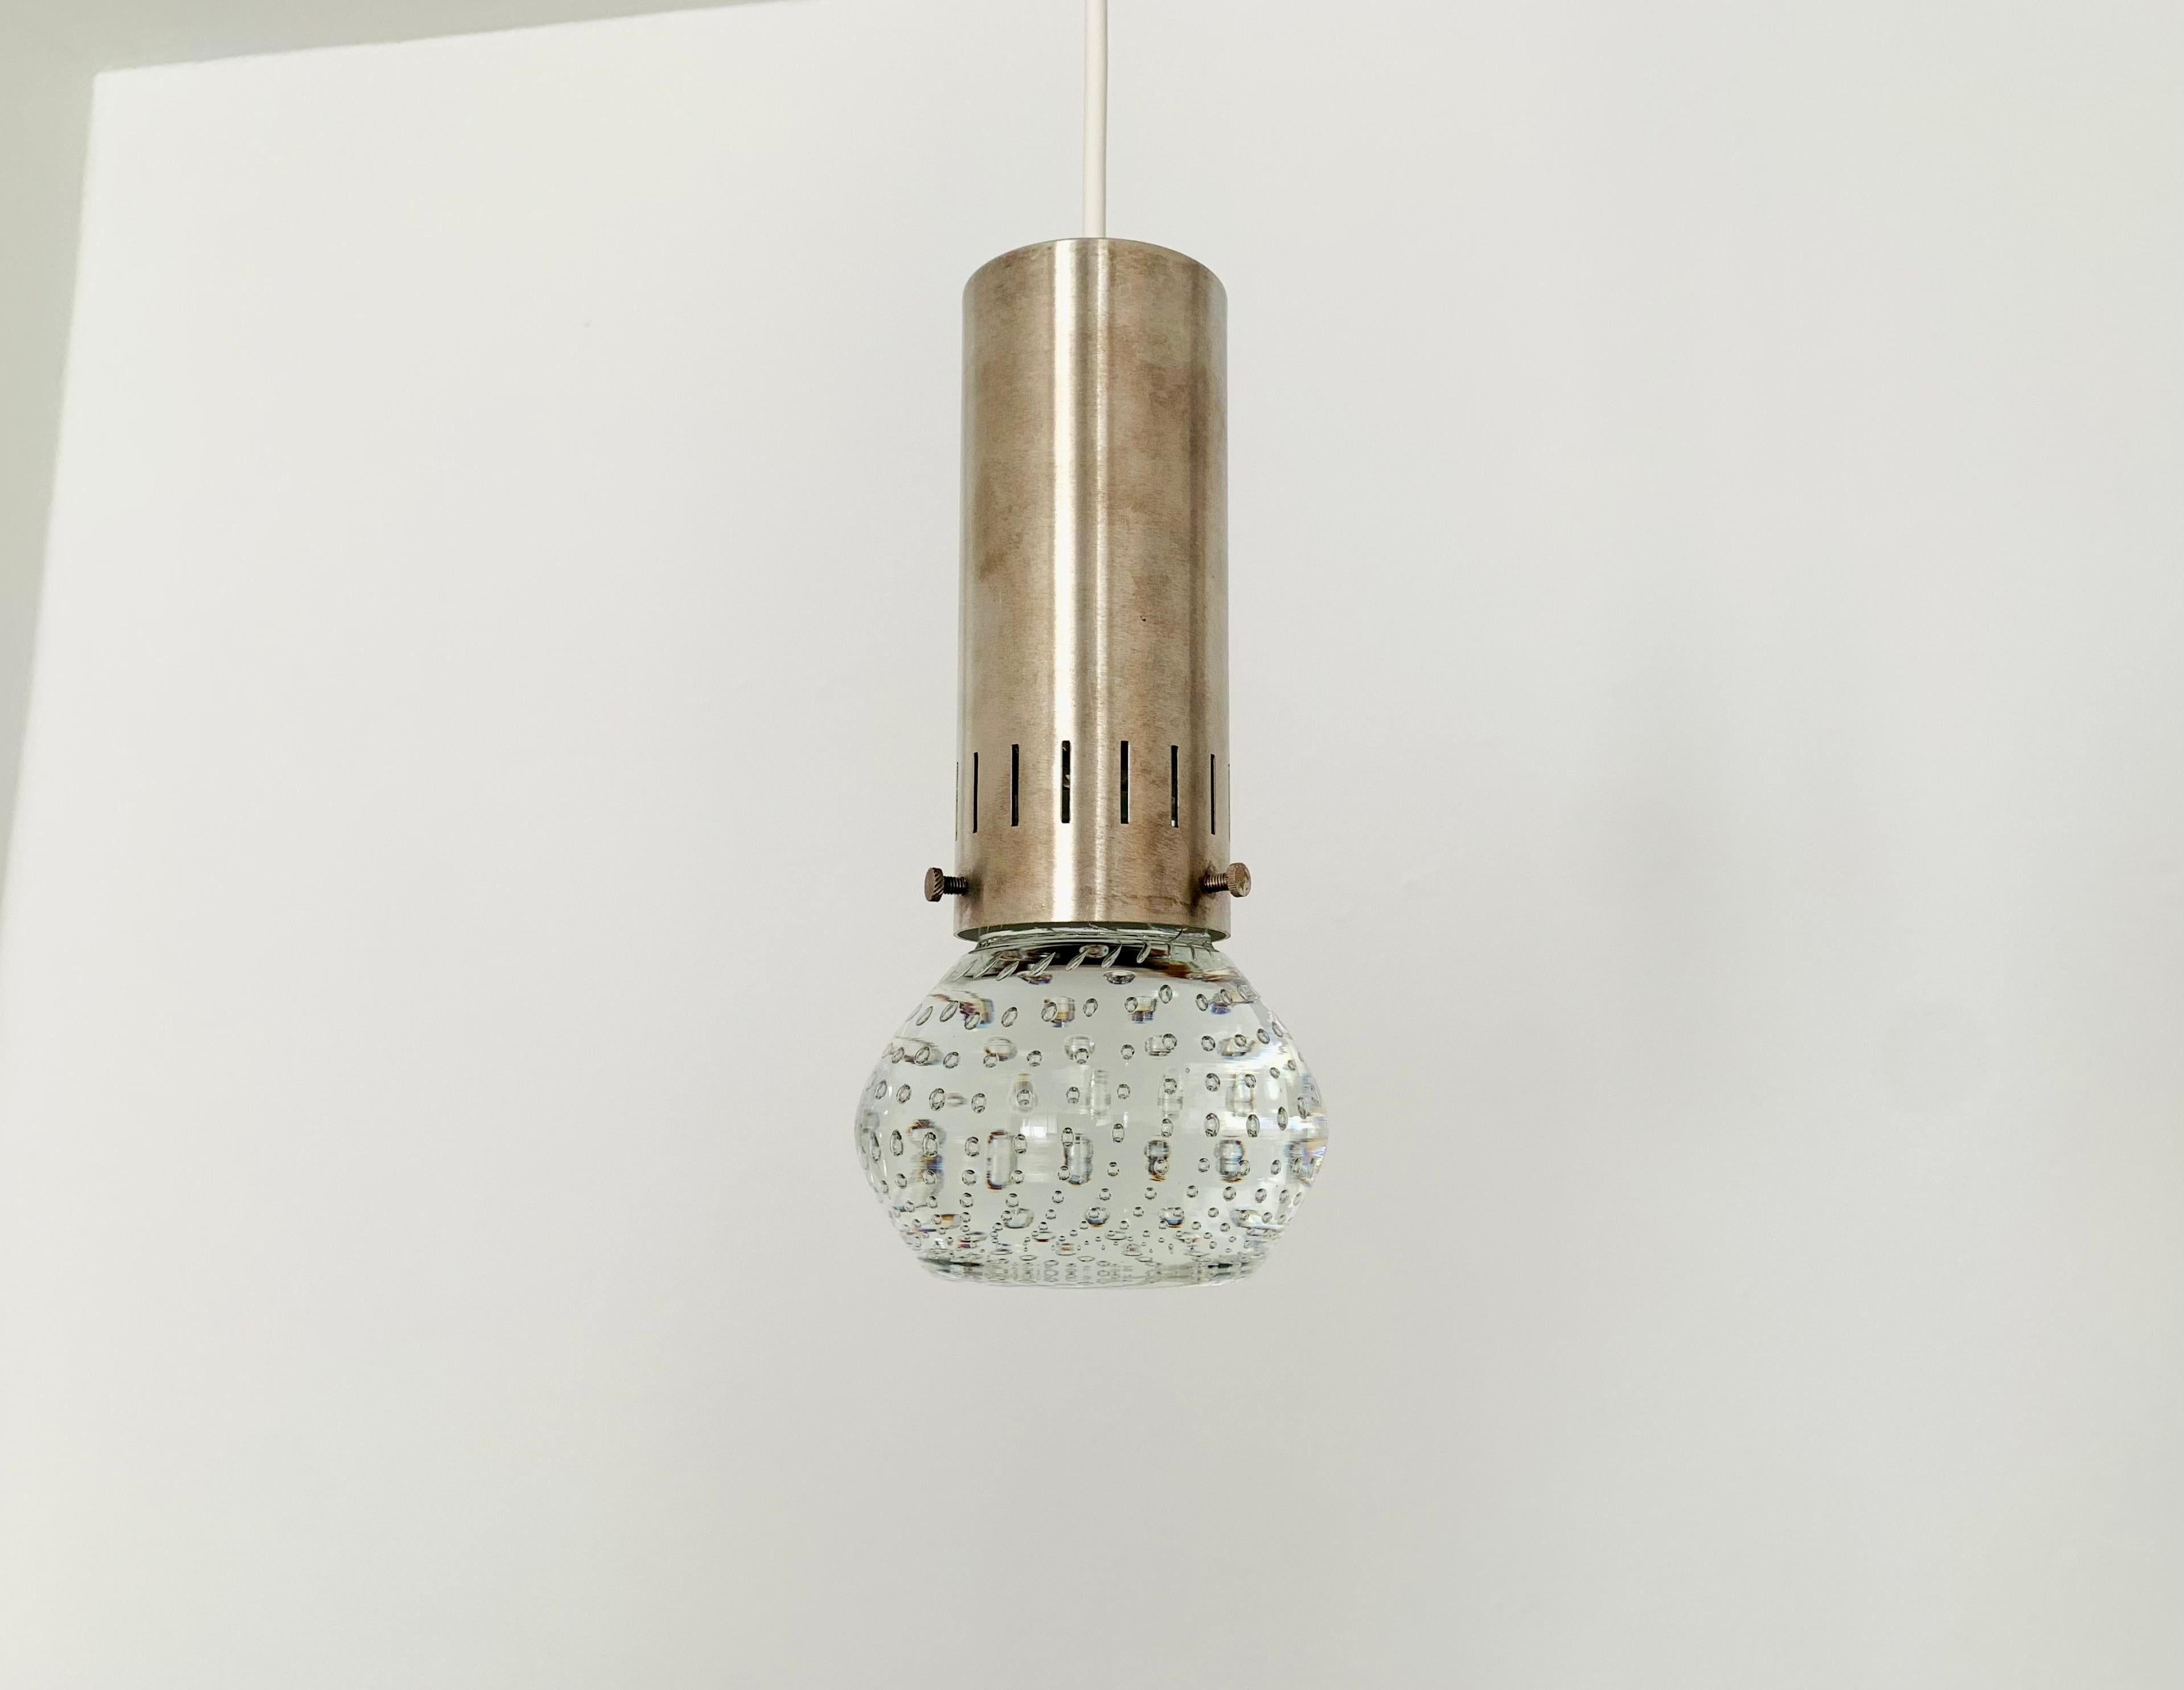 Very nice glass pendant lamps from the 1960s.
Great massive workmanship and a real eye -catcher for every home.
The air bubbles in the glass create a special light effect.

Condition:

Very good vintage condition with slight signs of use.
The metal